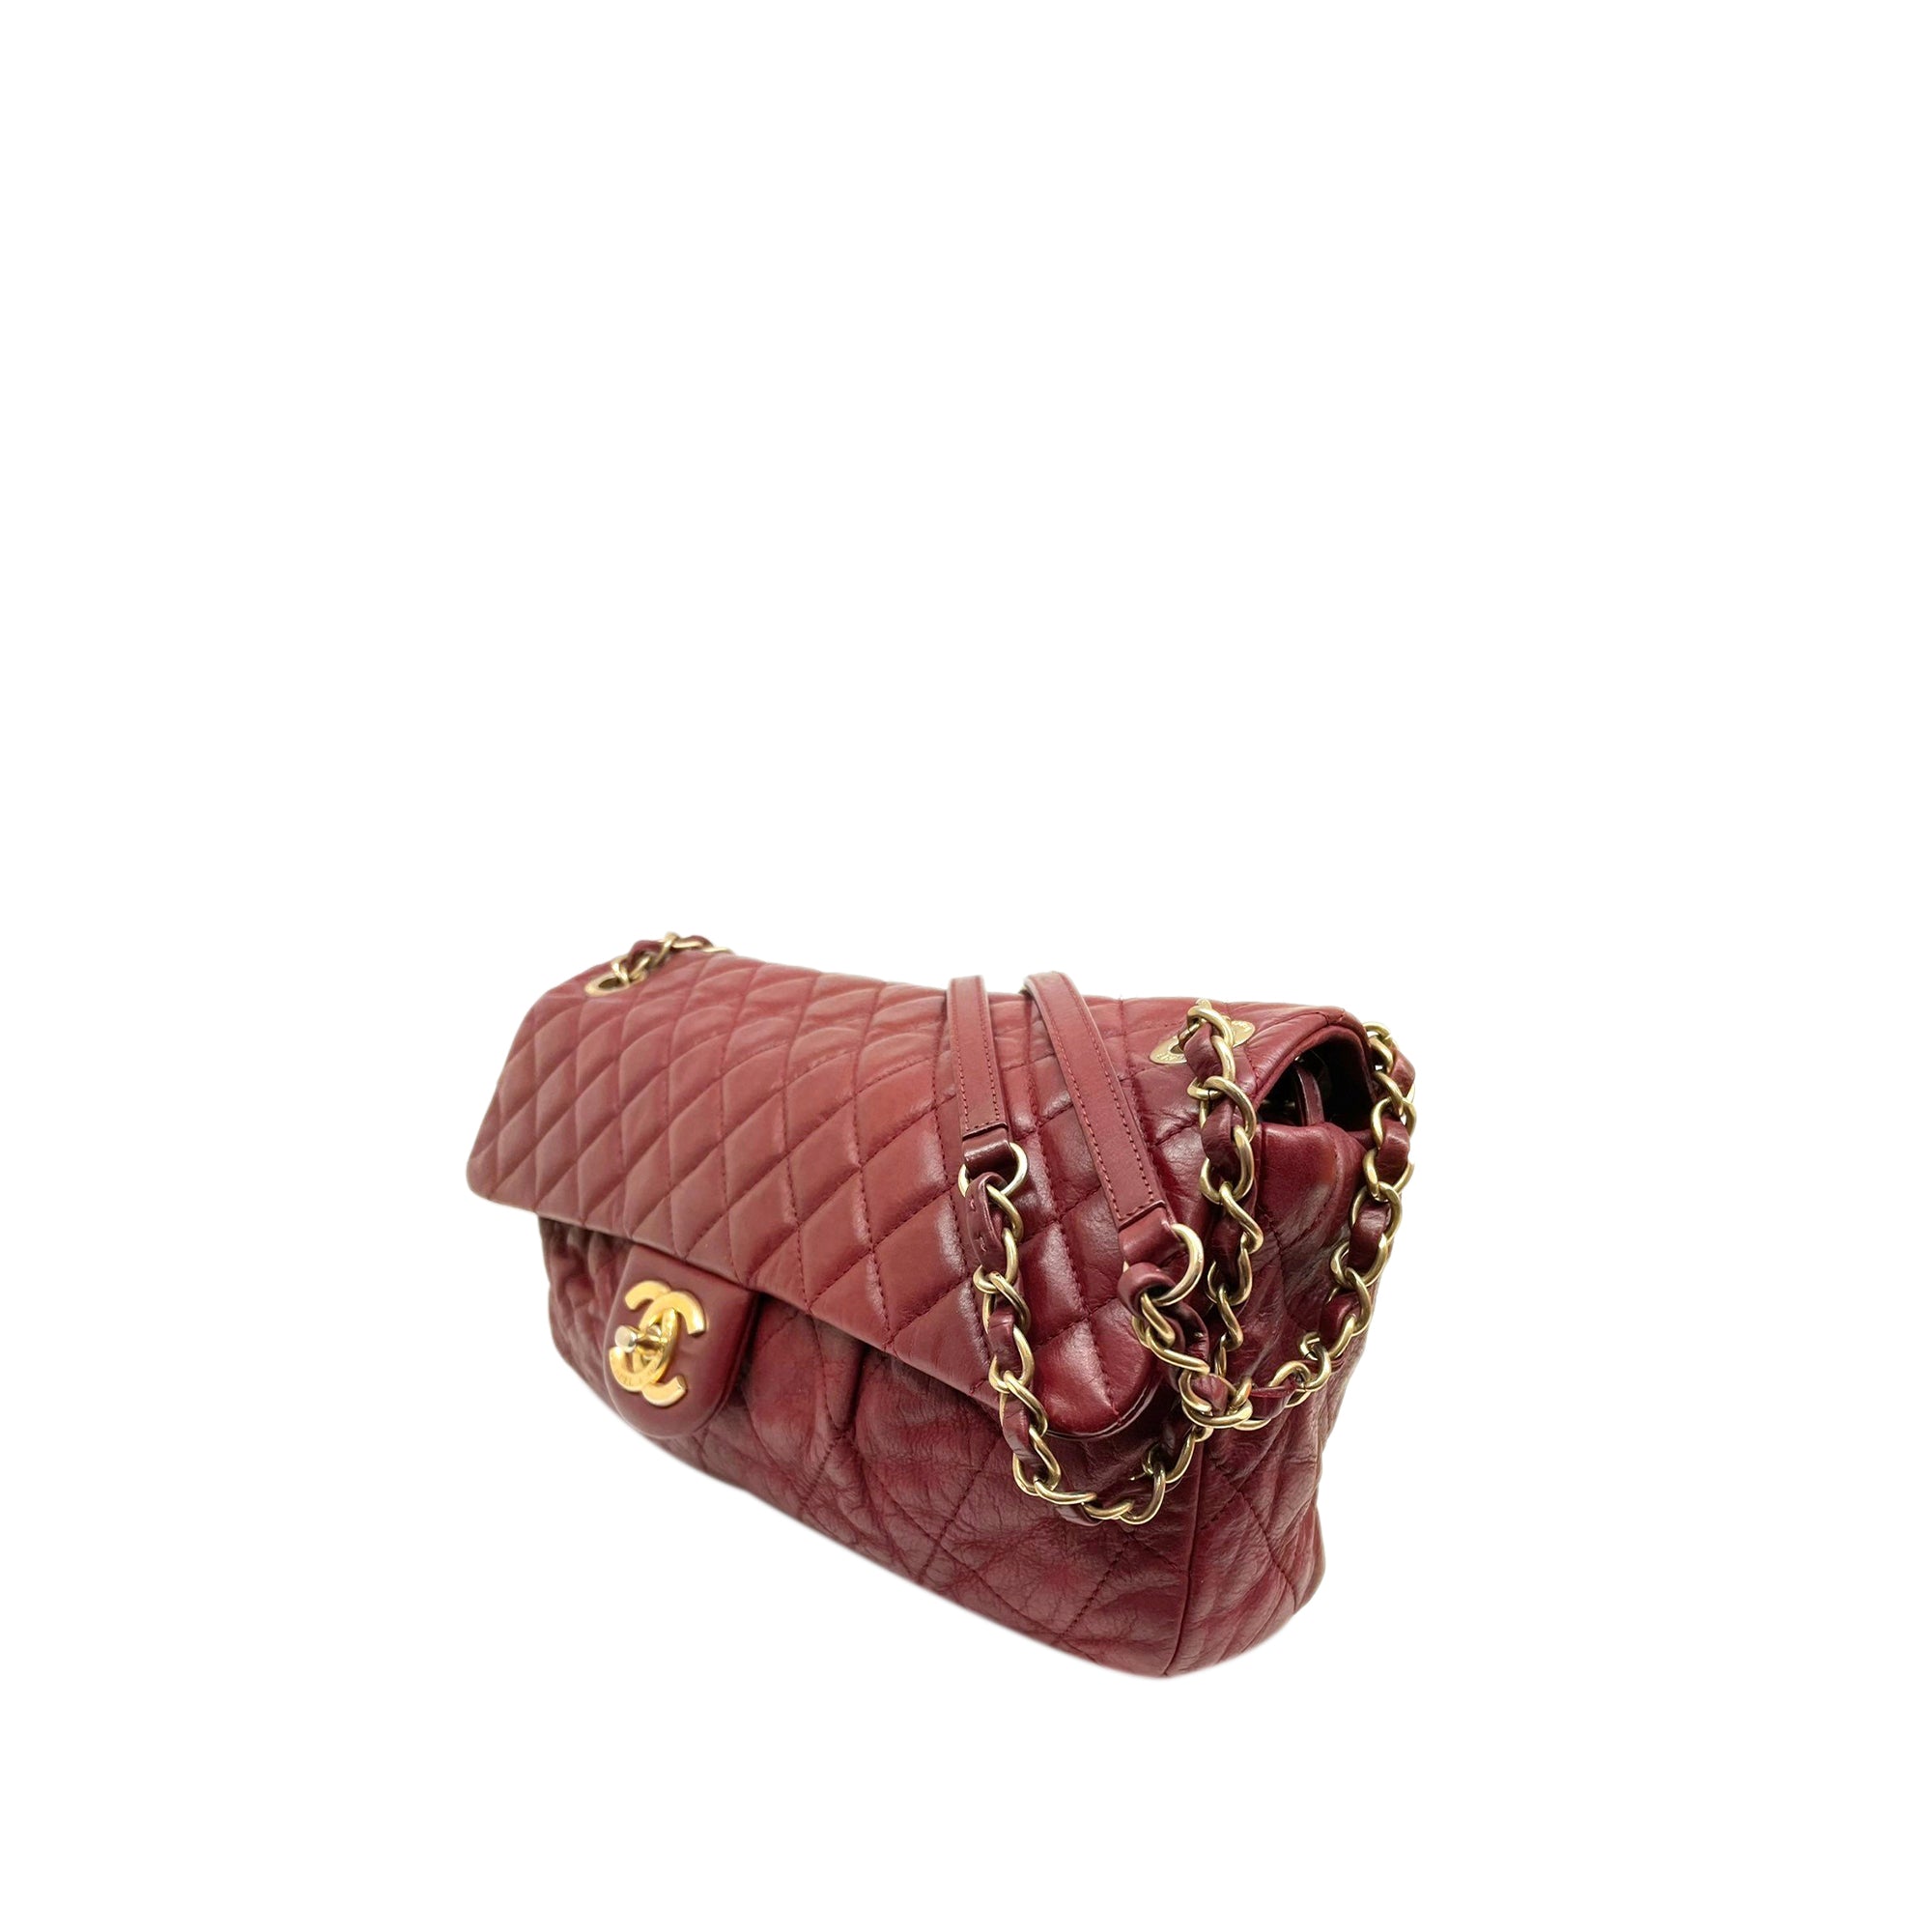 Red Chanel CC Timeless Lambskin Leather Single Flap Bag